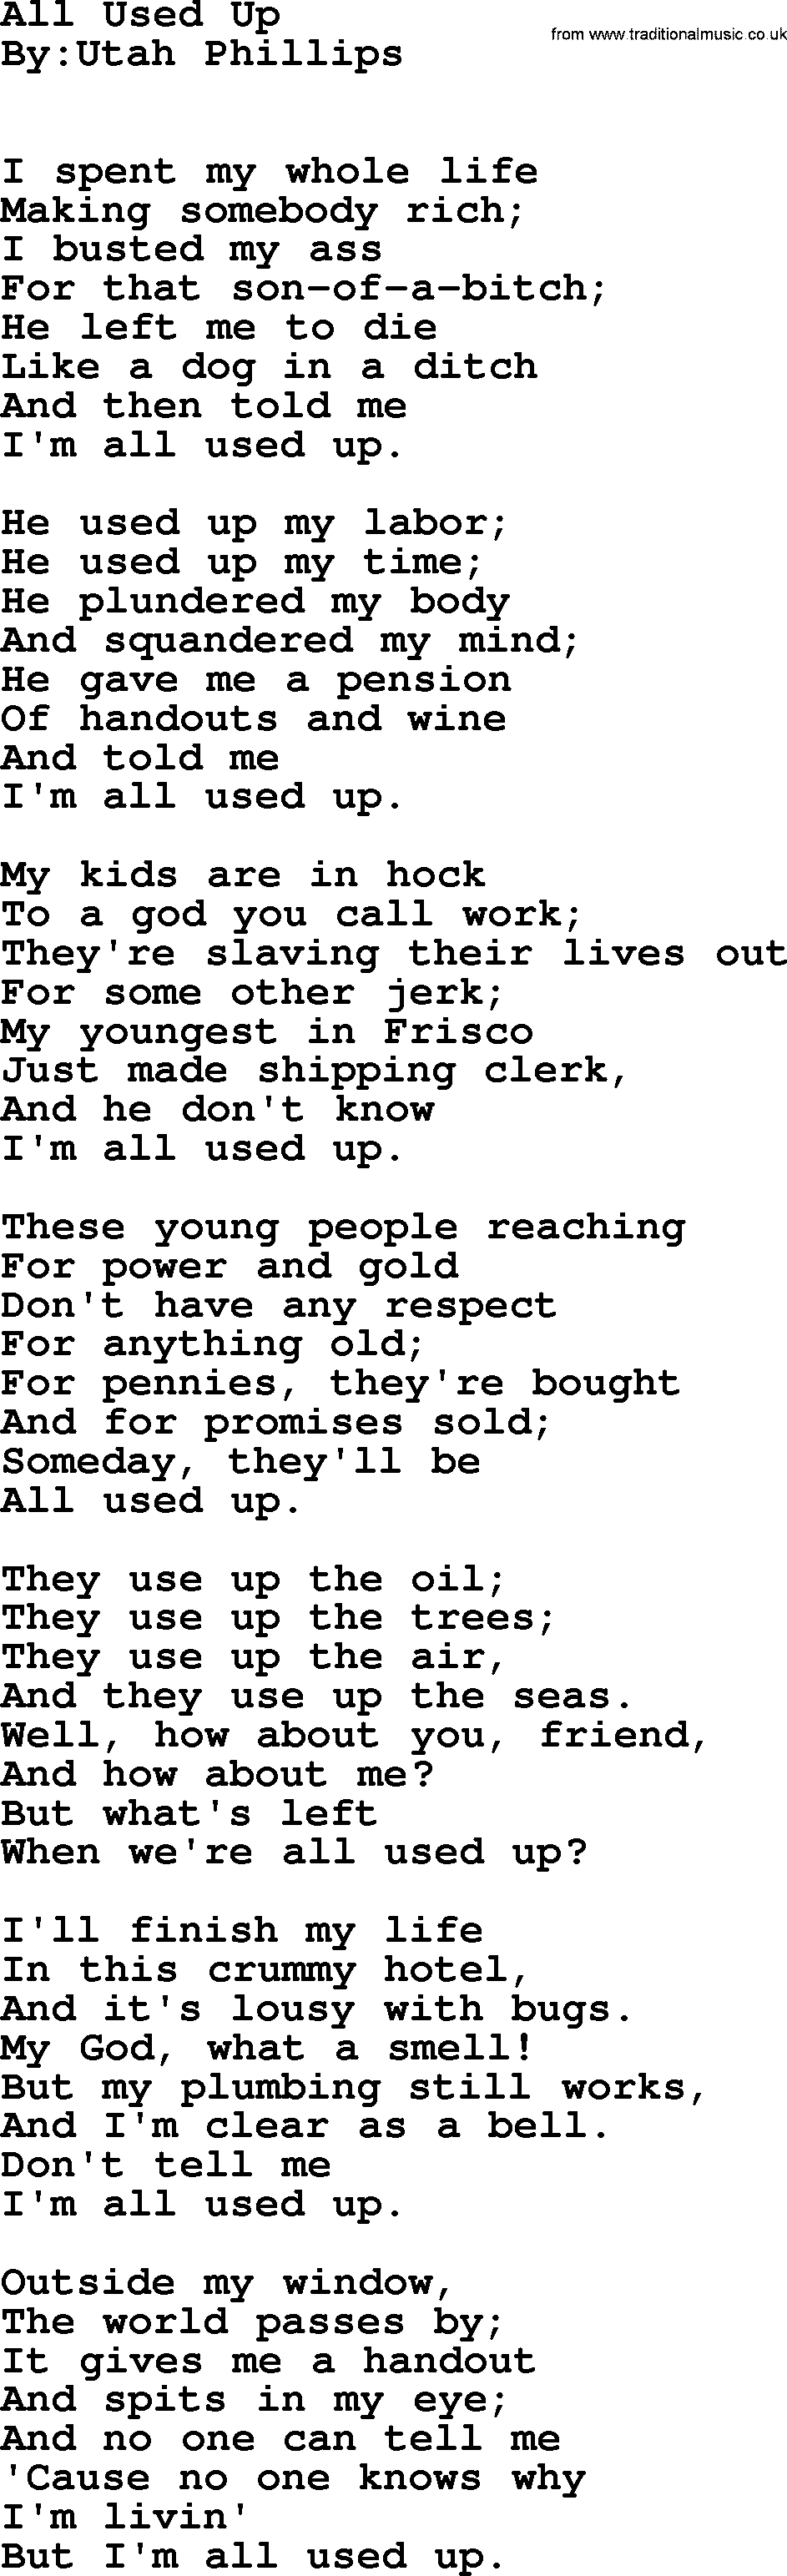 Political, Solidarity, Workers or Union song: All Used Up, lyrics